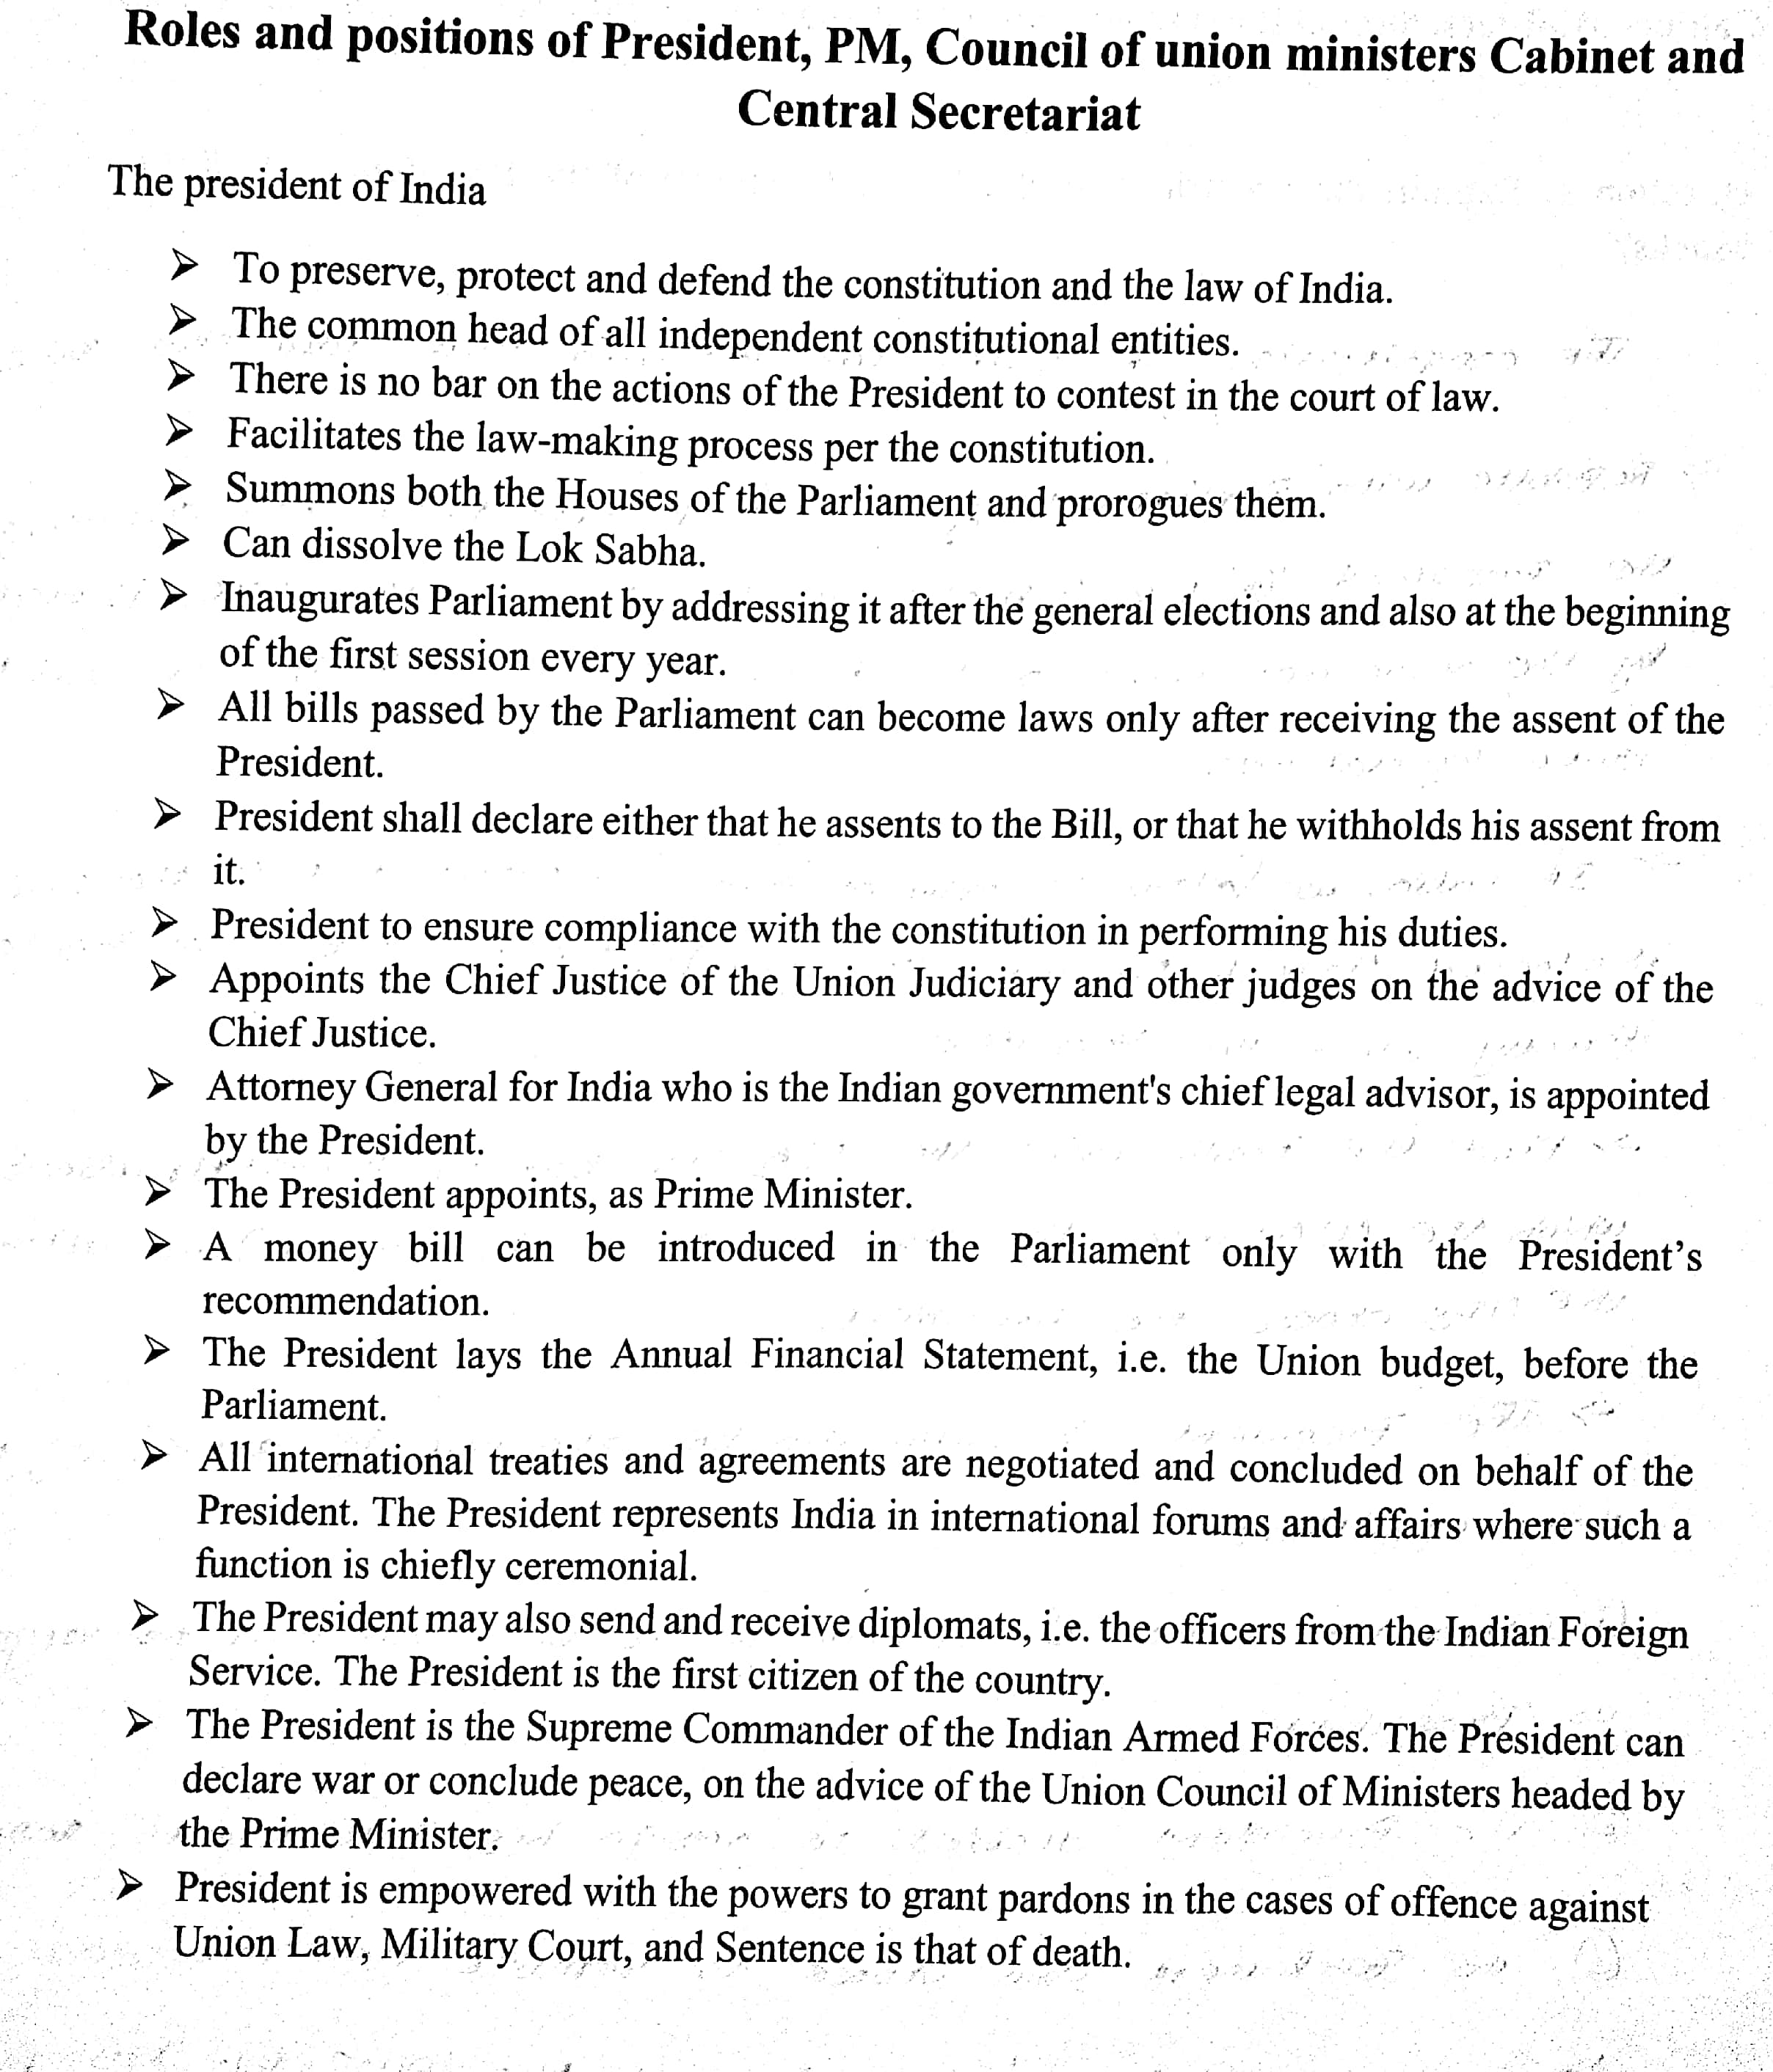 Roles and Postions of President,PM,Council of Union Minsters Cabinet and Central Secretariat-New Doc 2019-10-17 14.41.46_2.jpg